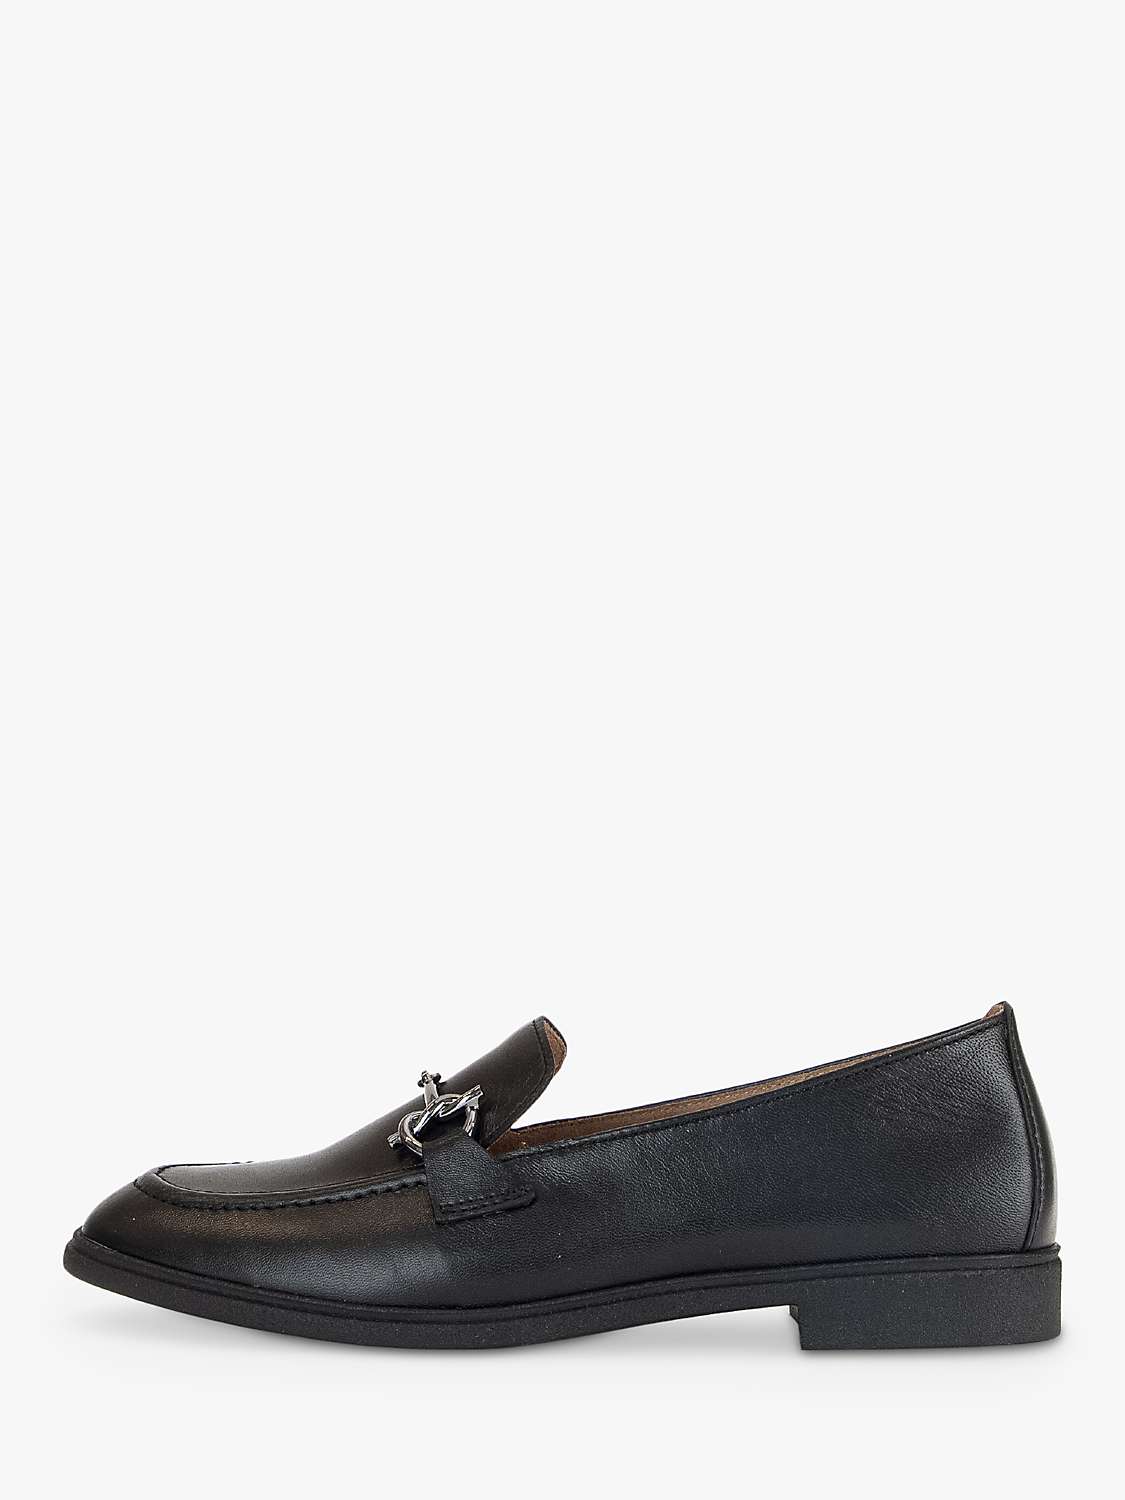 Buy Gabor Beaumont Leather Loafers, Black Online at johnlewis.com